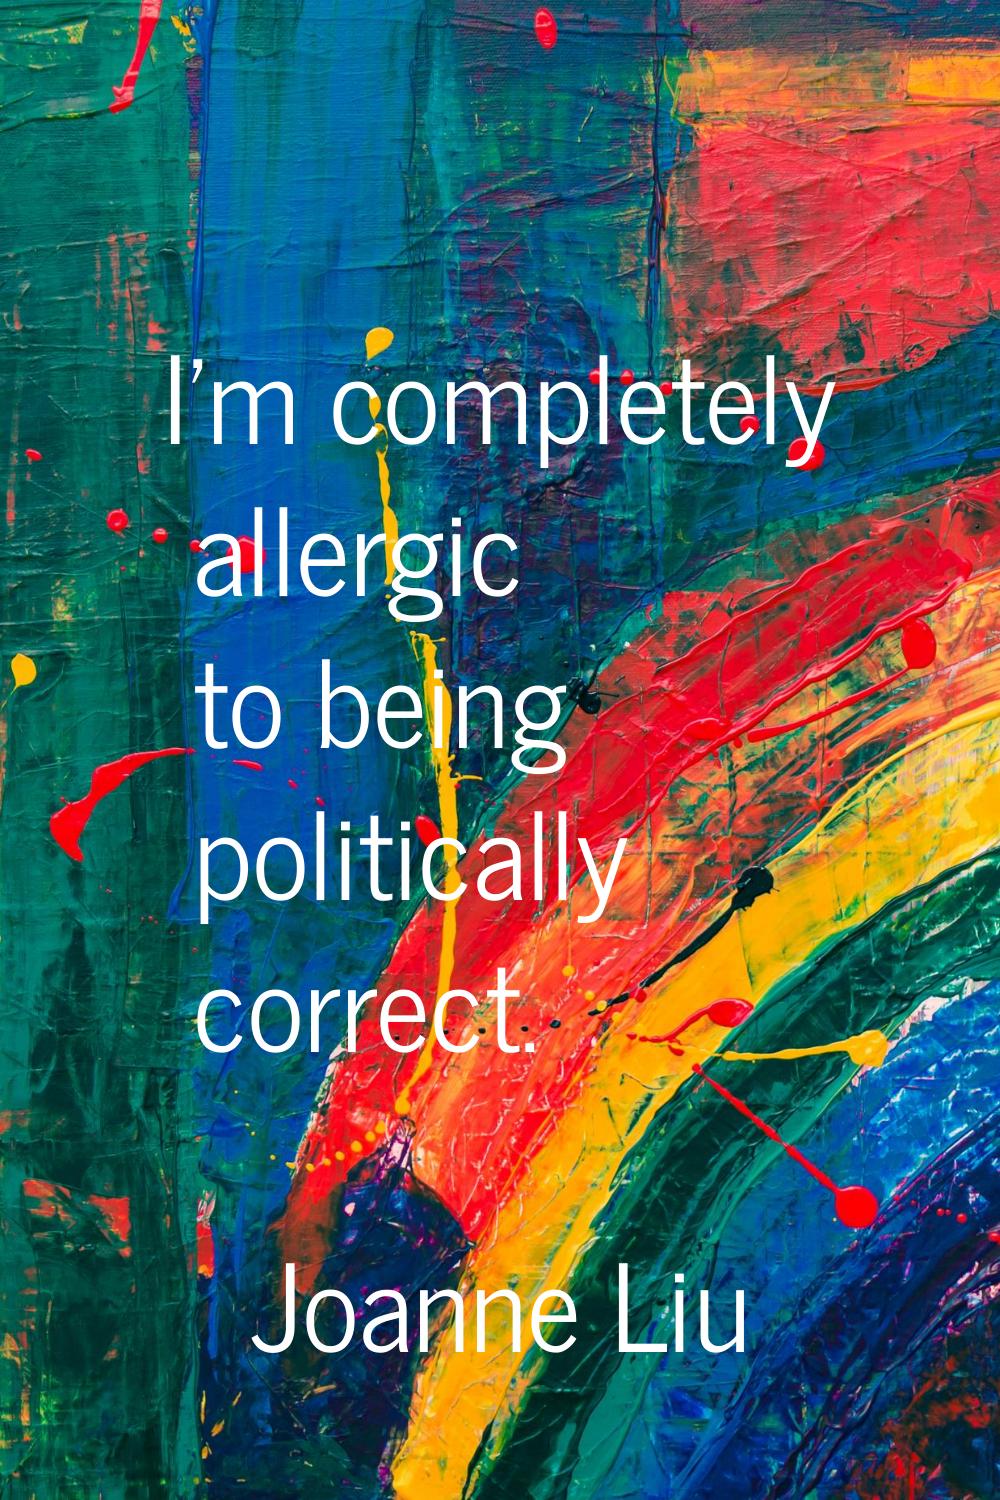 I'm completely allergic to being politically correct.